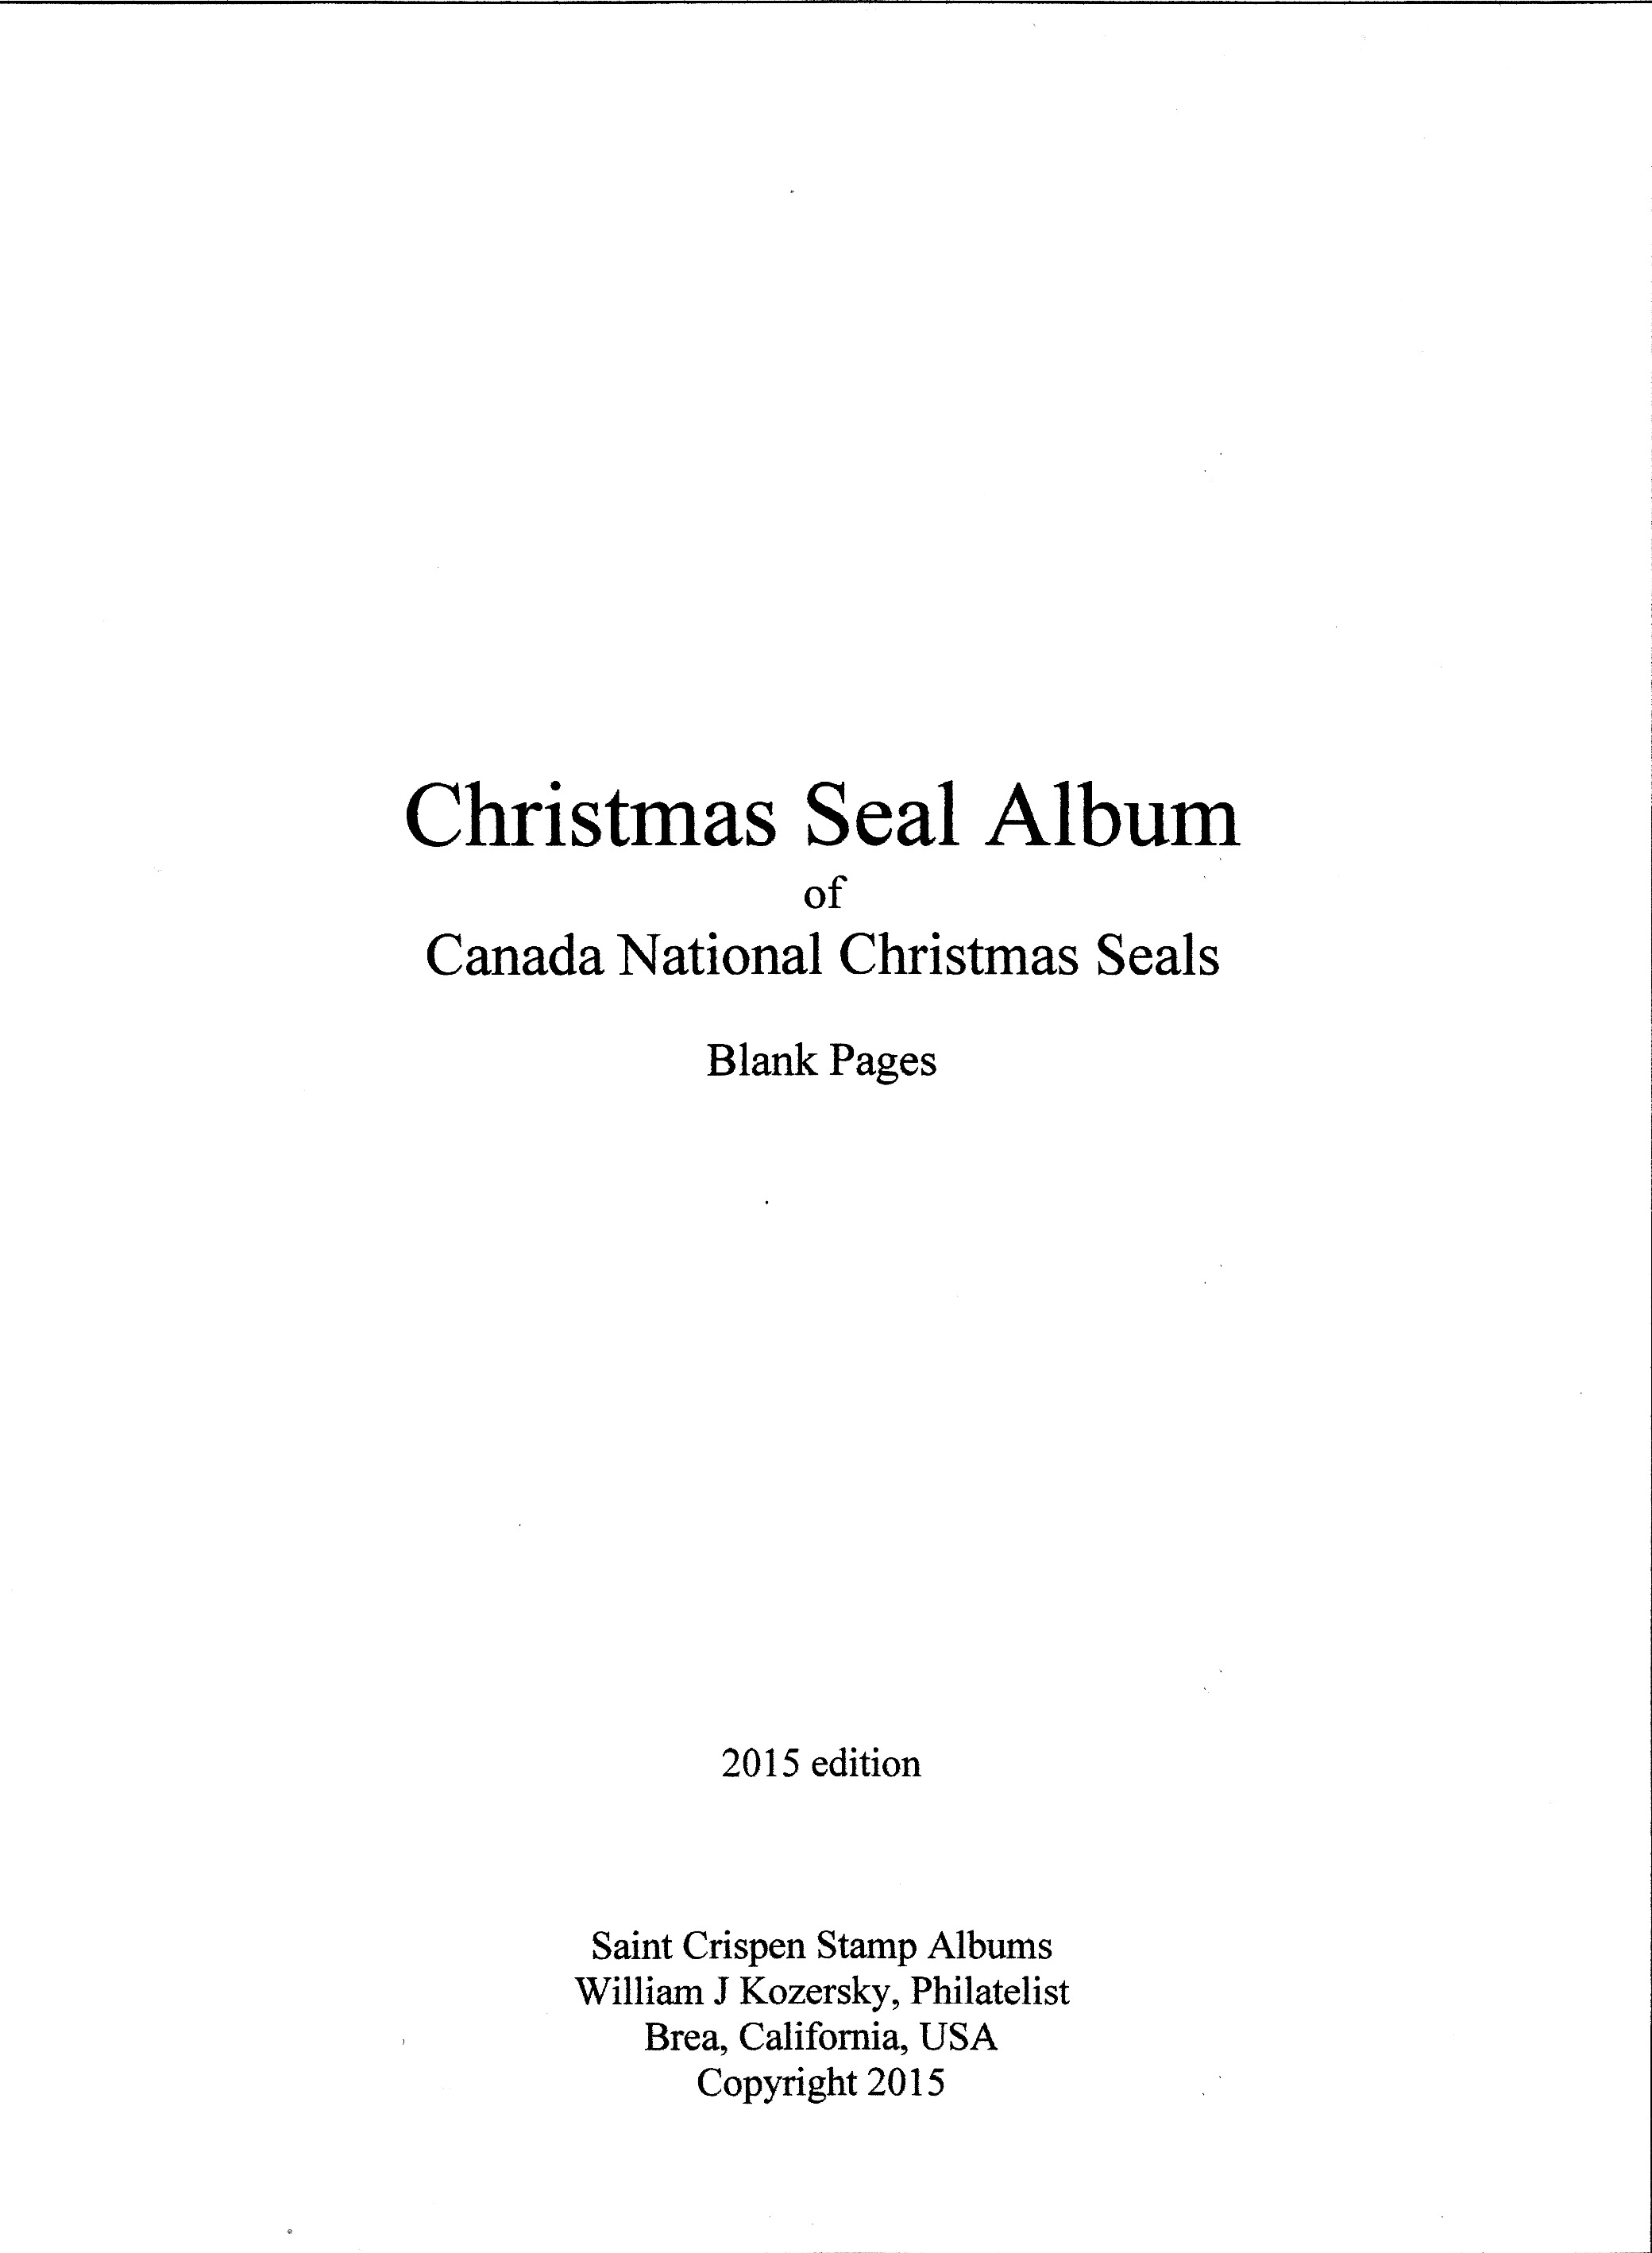 Canada National Christmas Seal Stamp Album Pages blank pages with title & border (white)